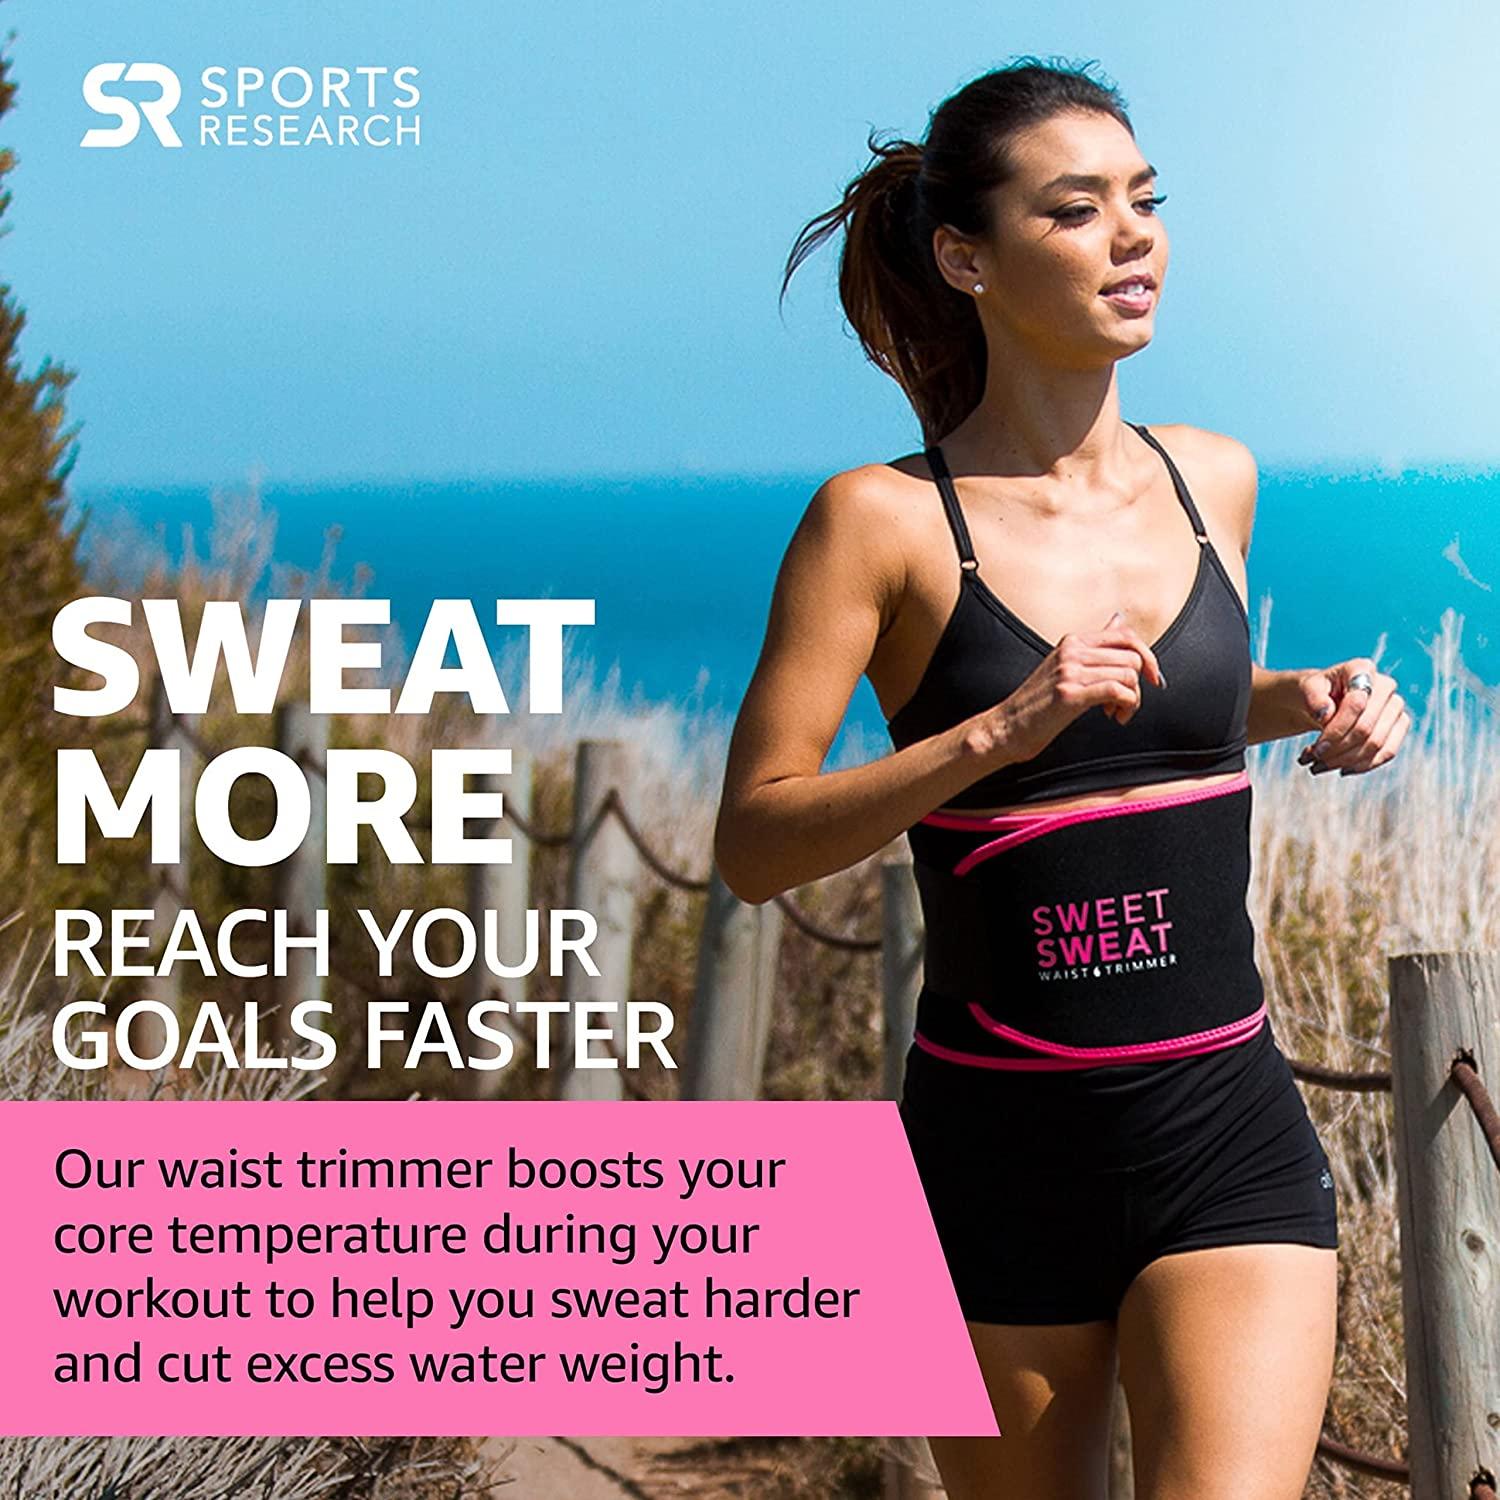 Sweet Sweat Waist Trimmer, by Sports Research - Sweat Band Increases  Stomach Temp to Cut Water Weight Medium Black/Pink